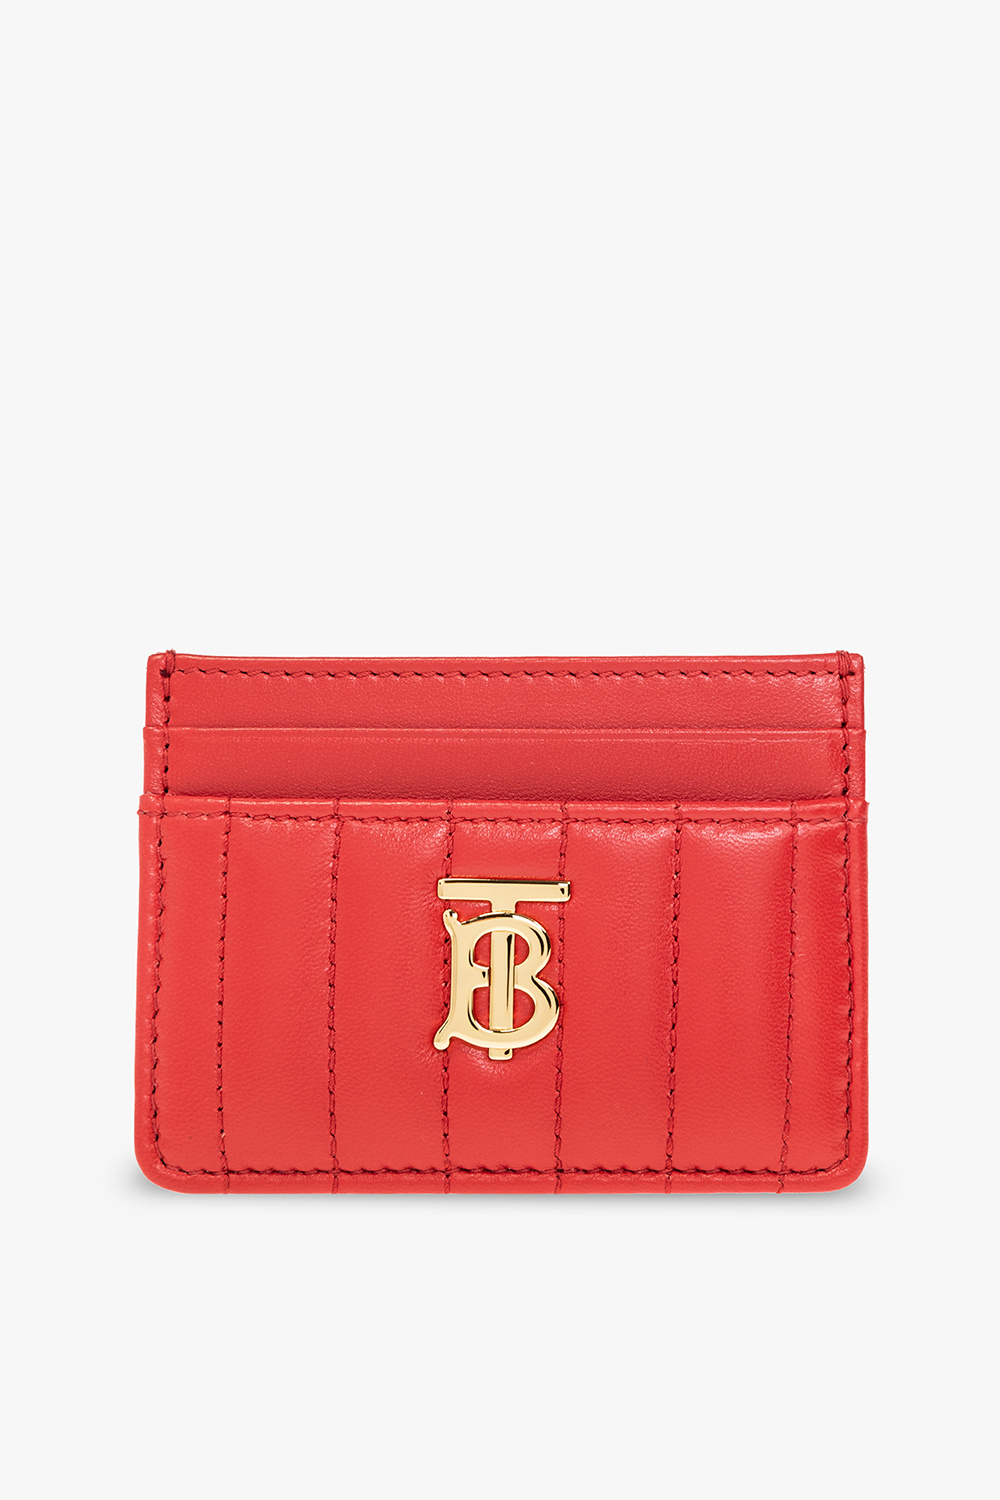 Burberry red leather wallet women NEW